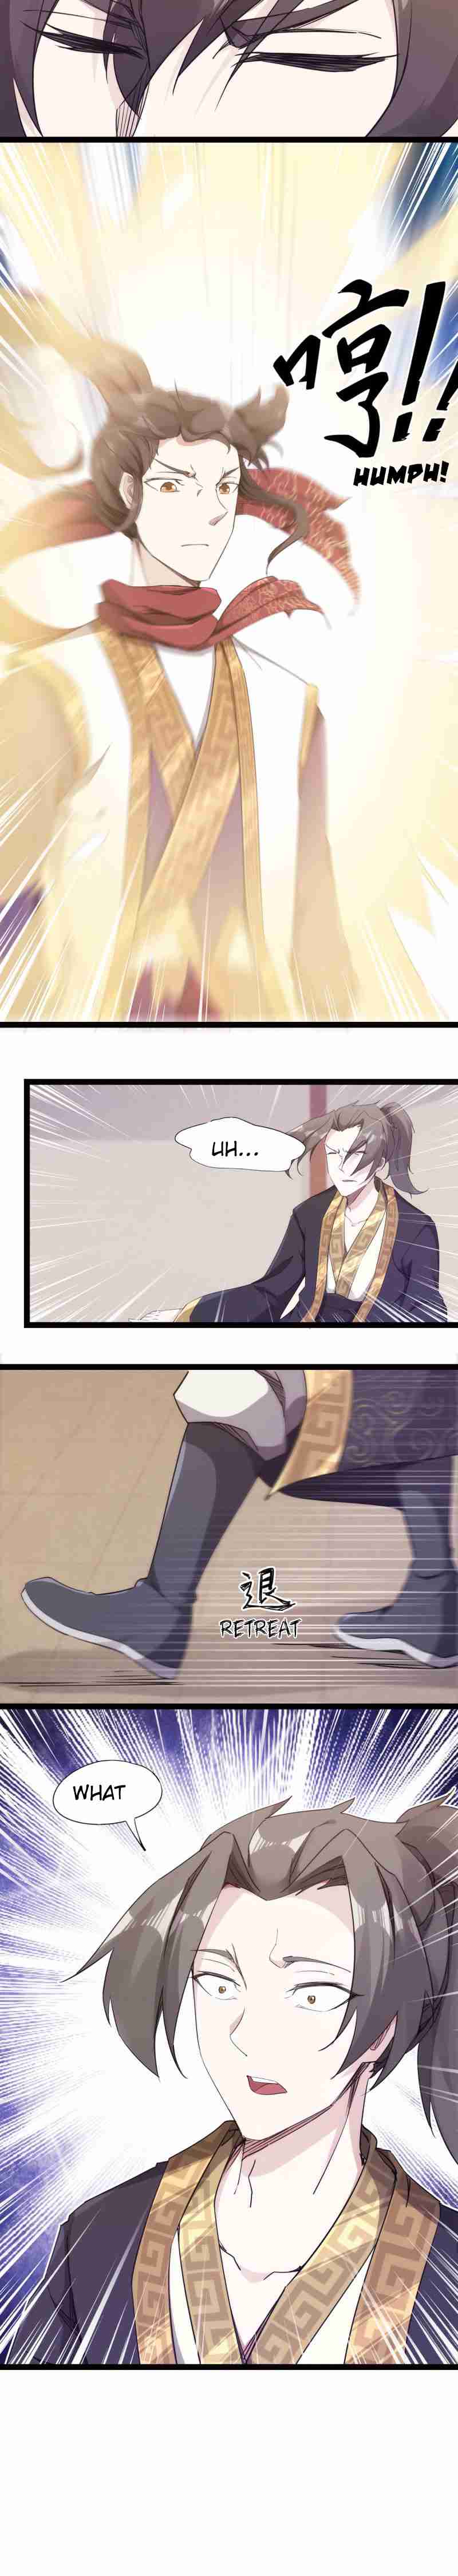 Path of the Sword Ch. 11